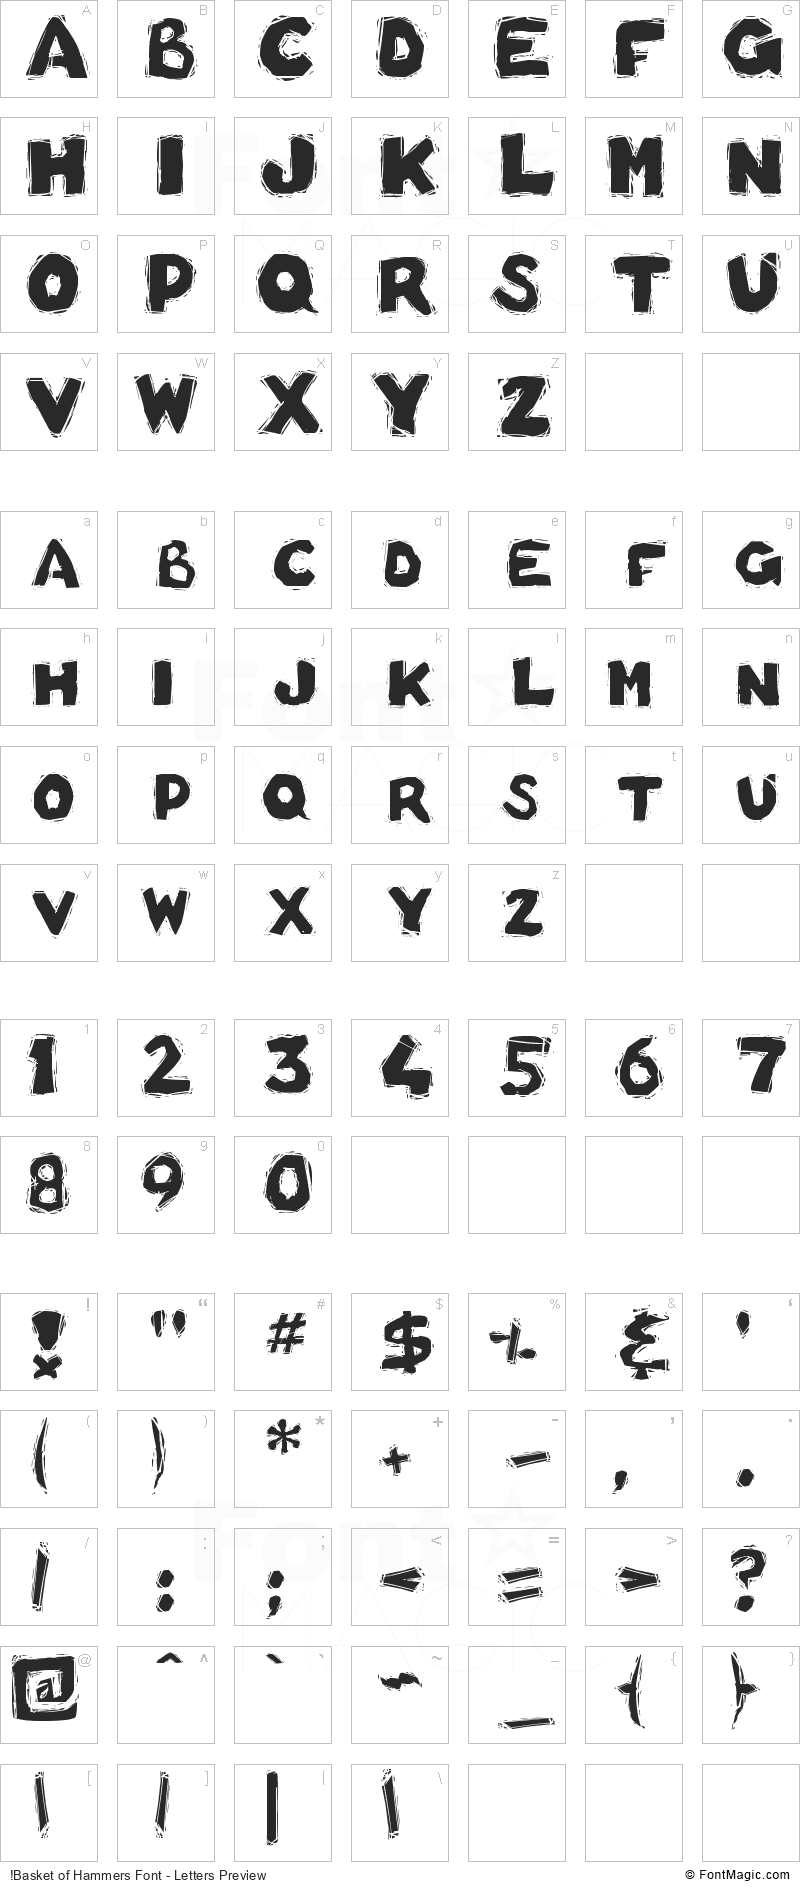 !Basket of Hammers Font - All Latters Preview Chart